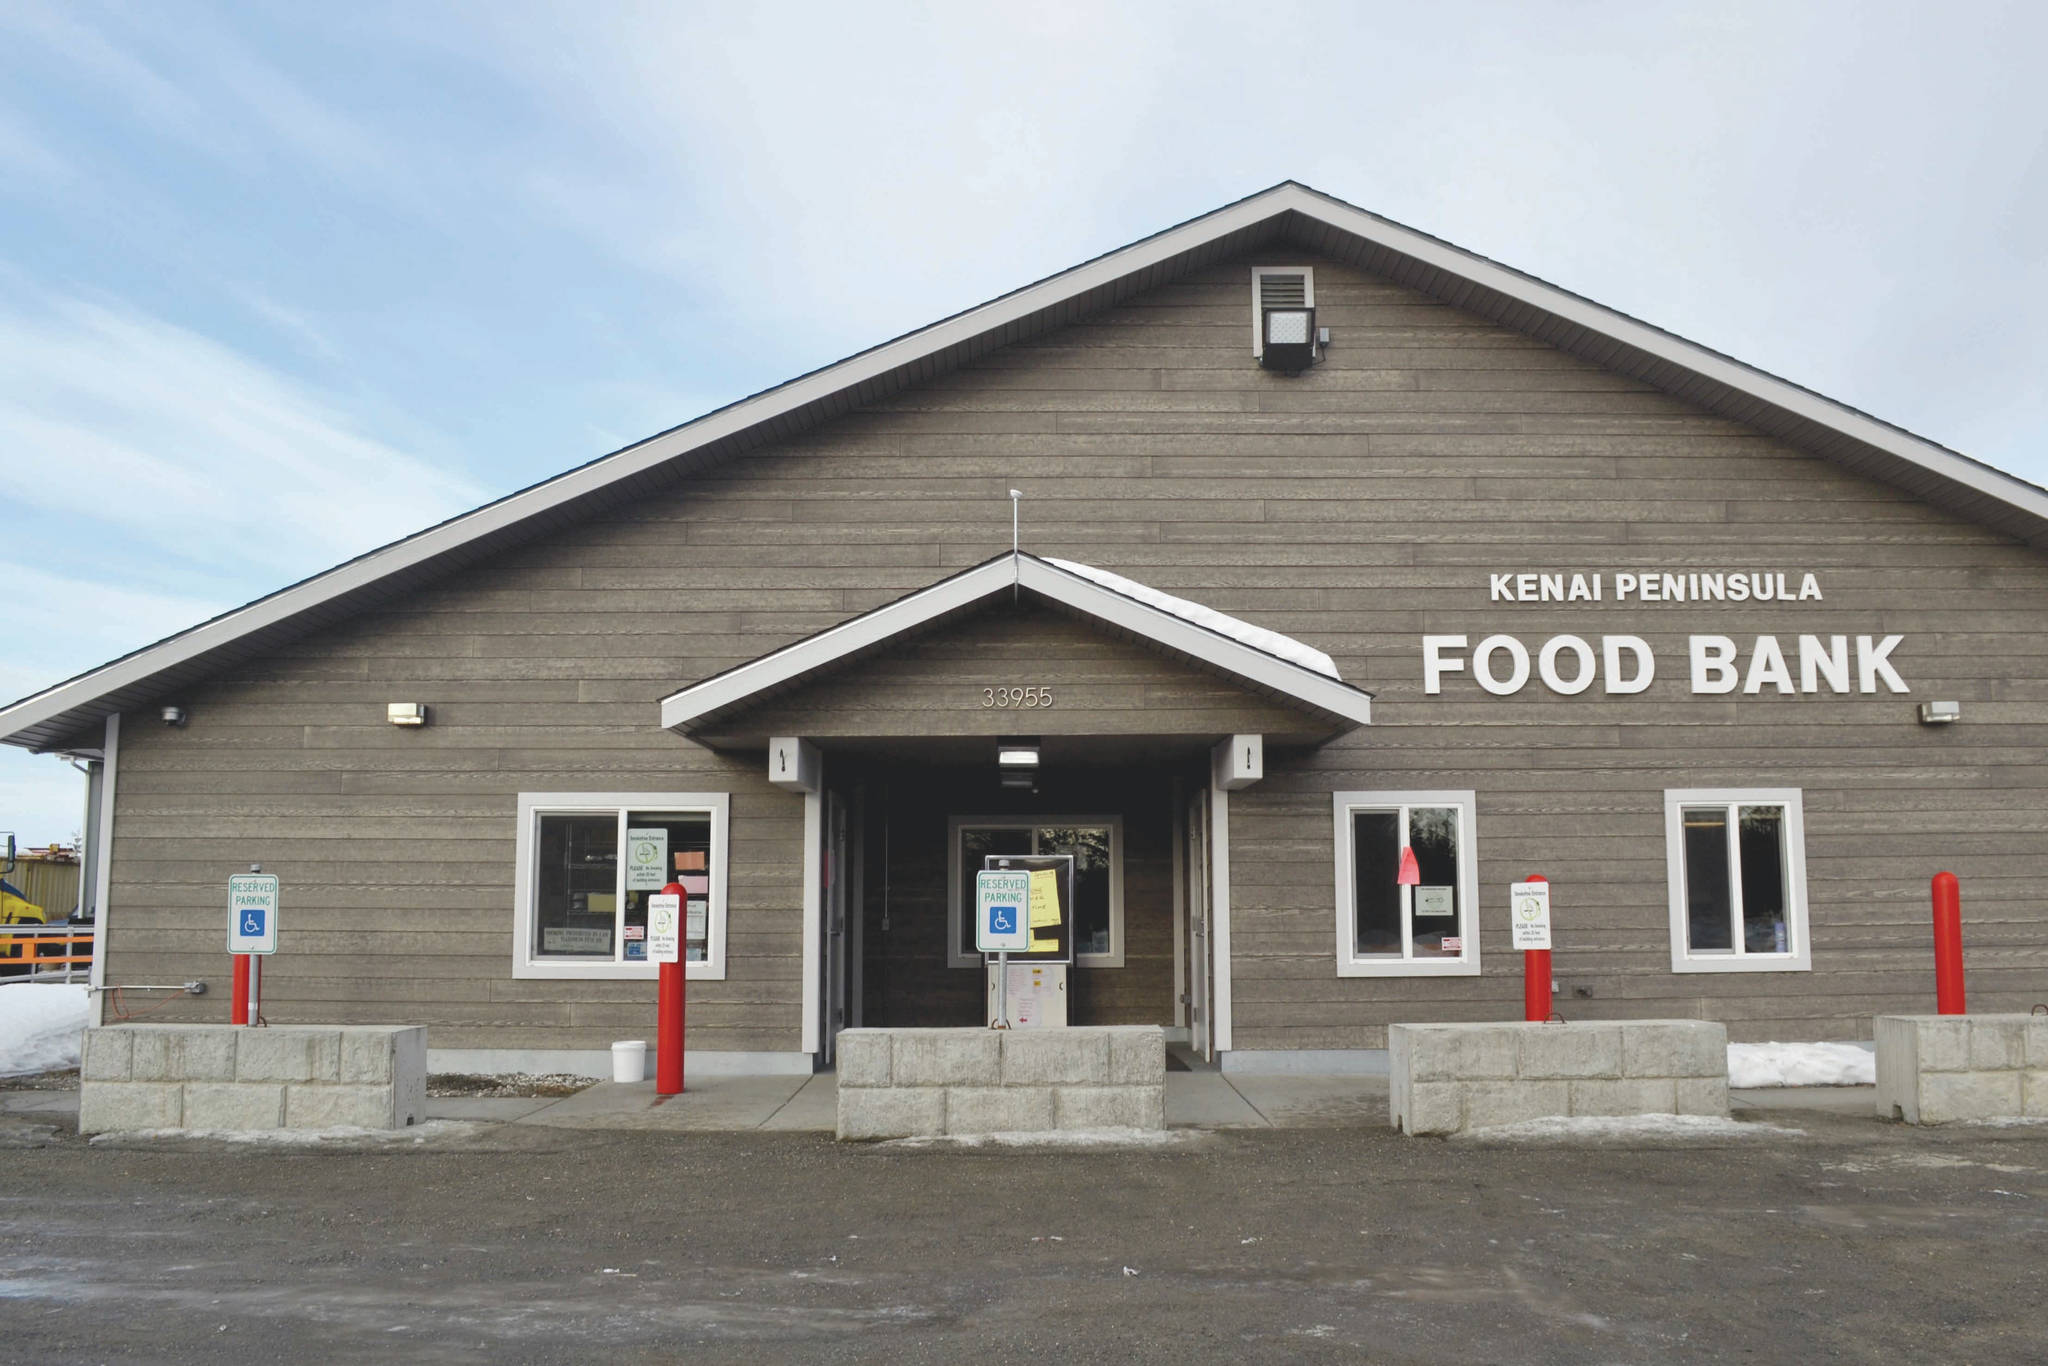 The Kenai Peninsula Food Bank is photographed on March 26, 2020. (Victoria Petersen/Peninsula Clarion)